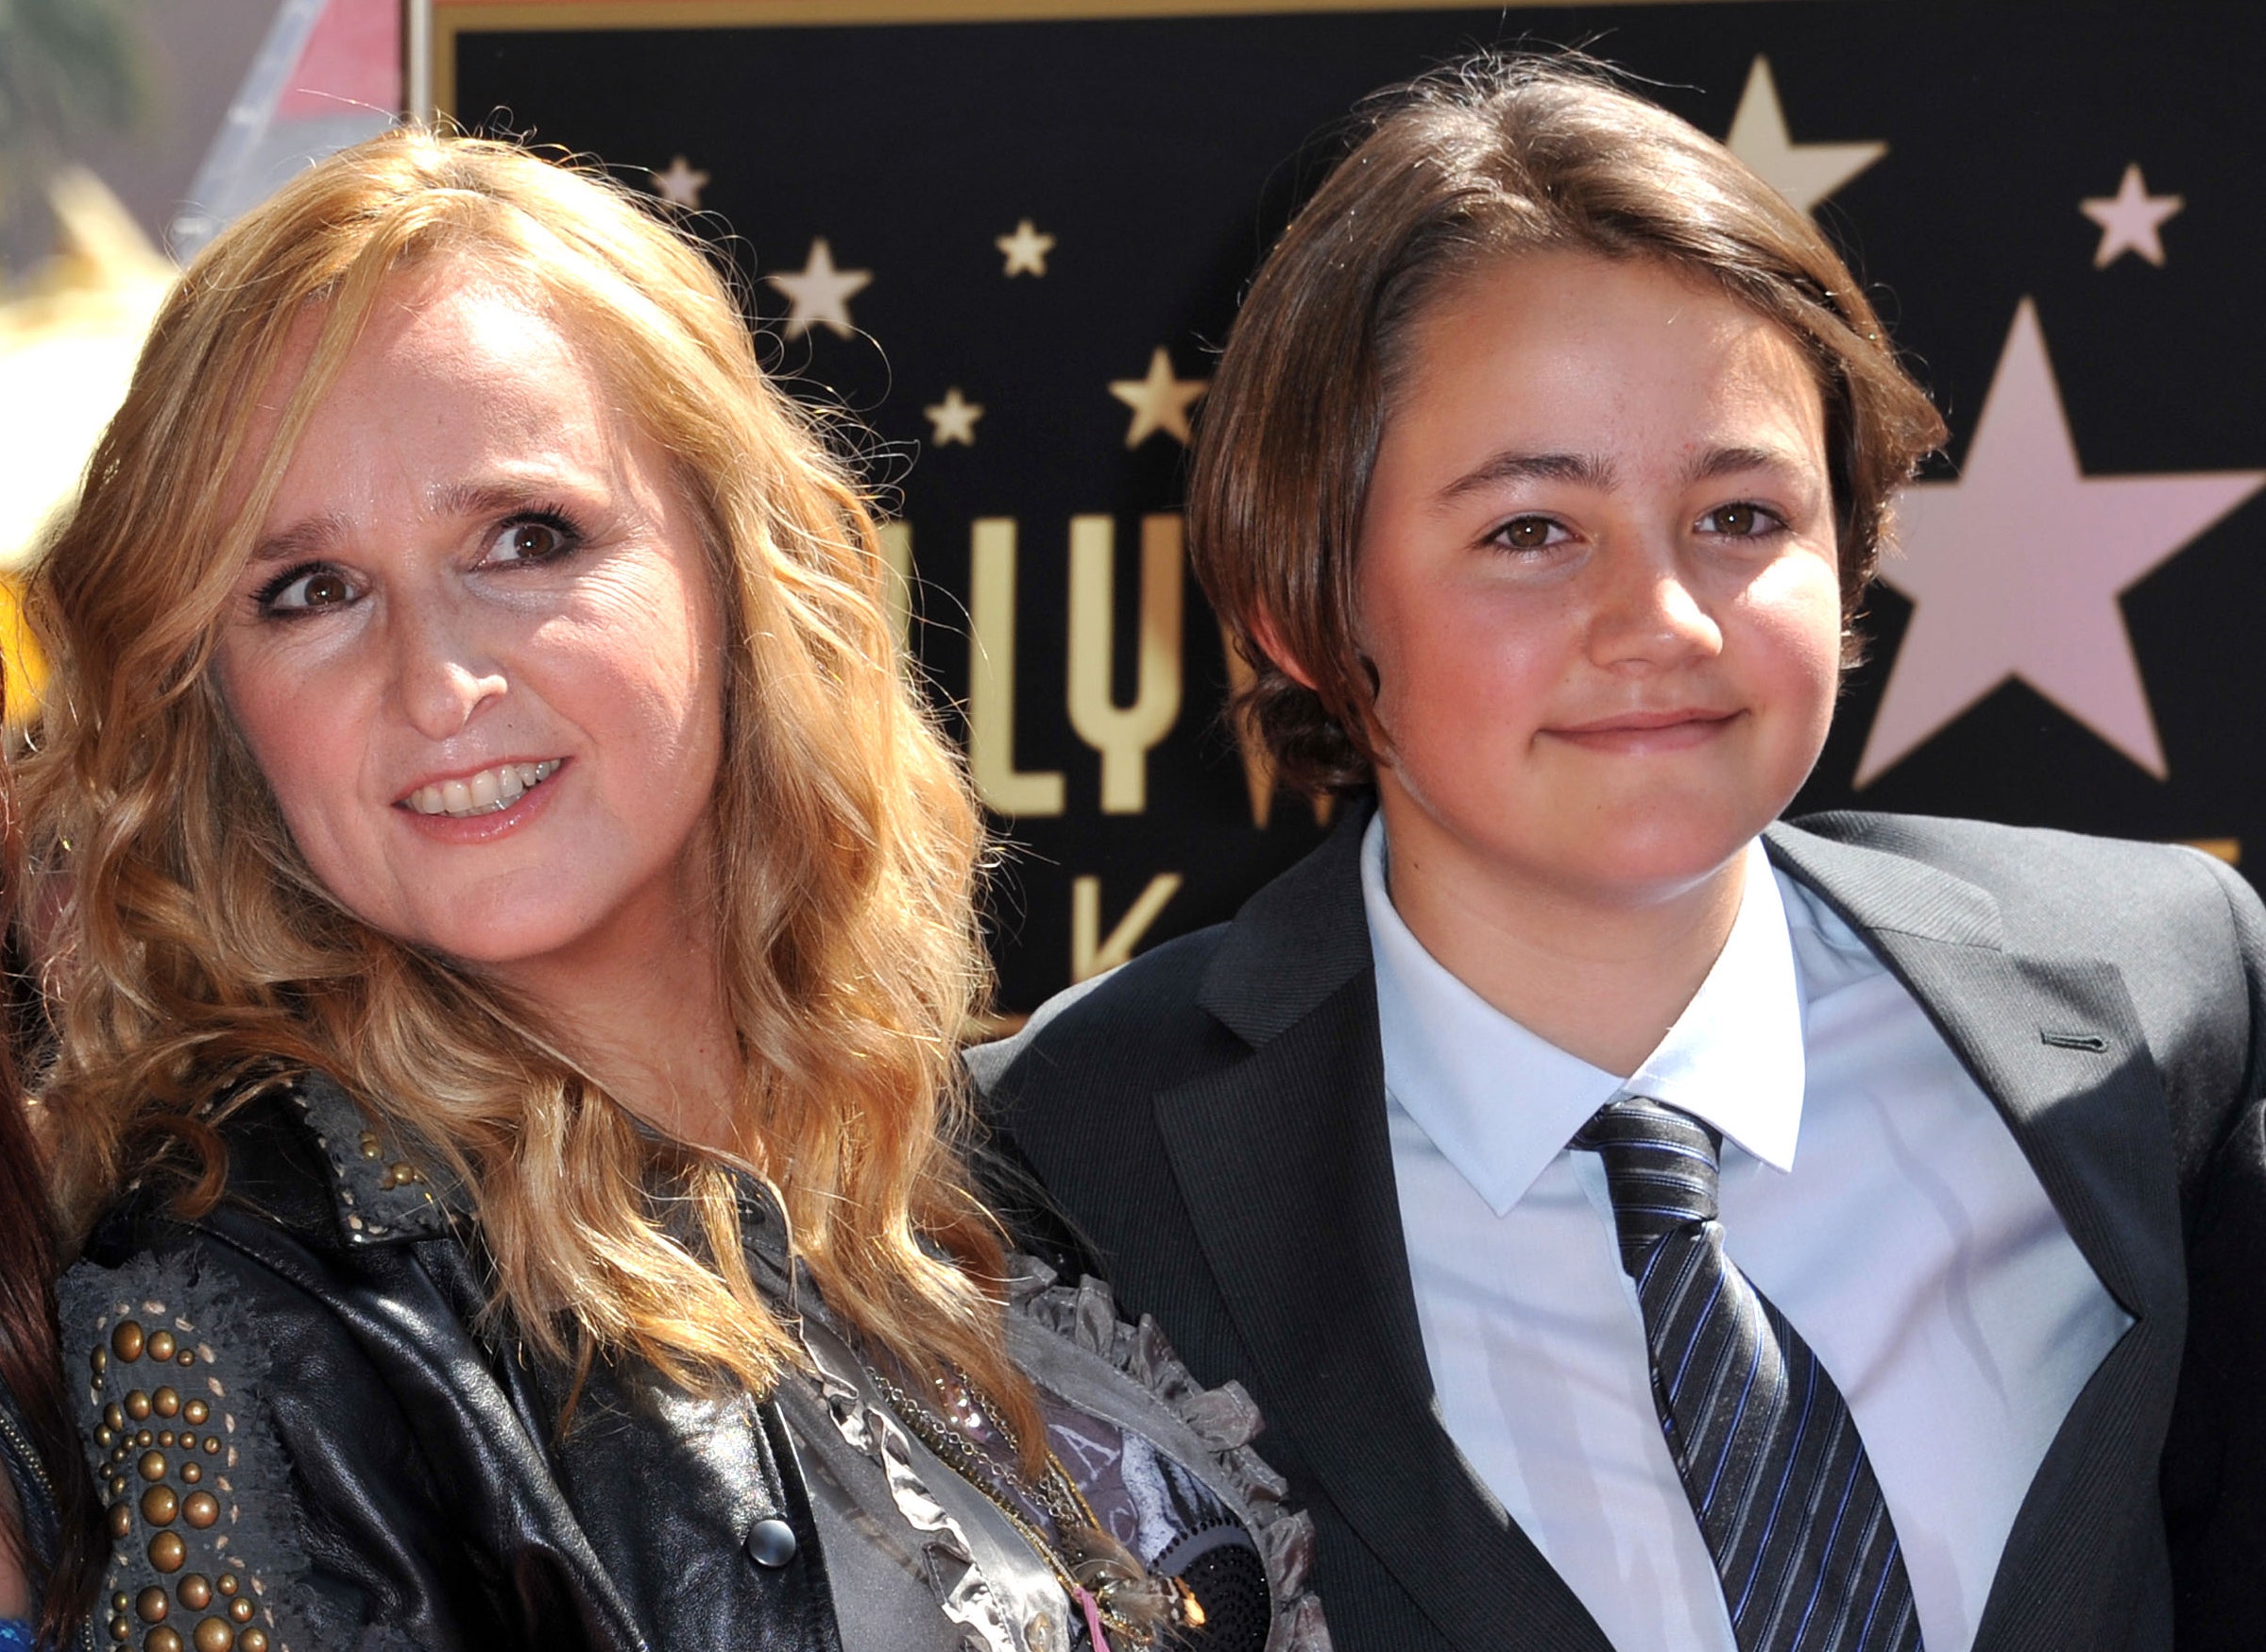 Melissa Etheridge shares continued grief from loss of son to opioid addiction: 'The shame is too big’